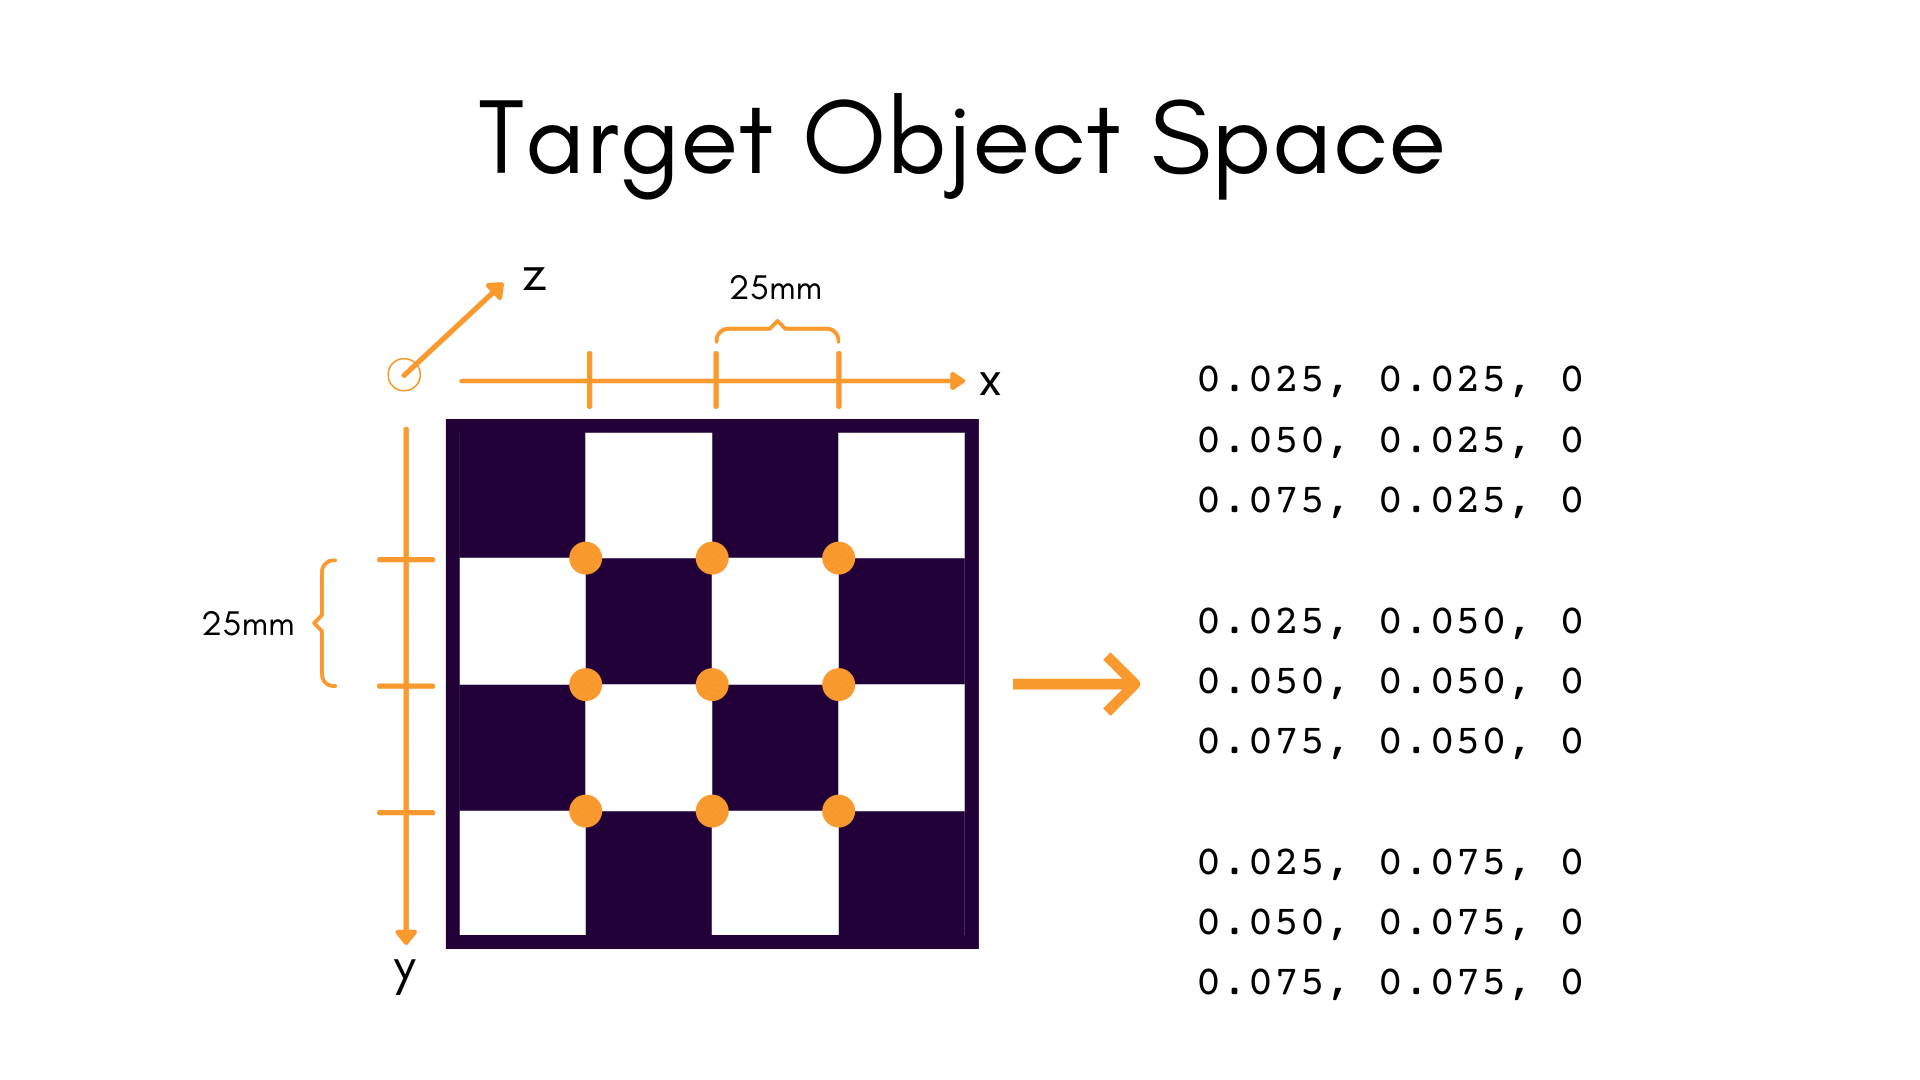 Detector-defined object space